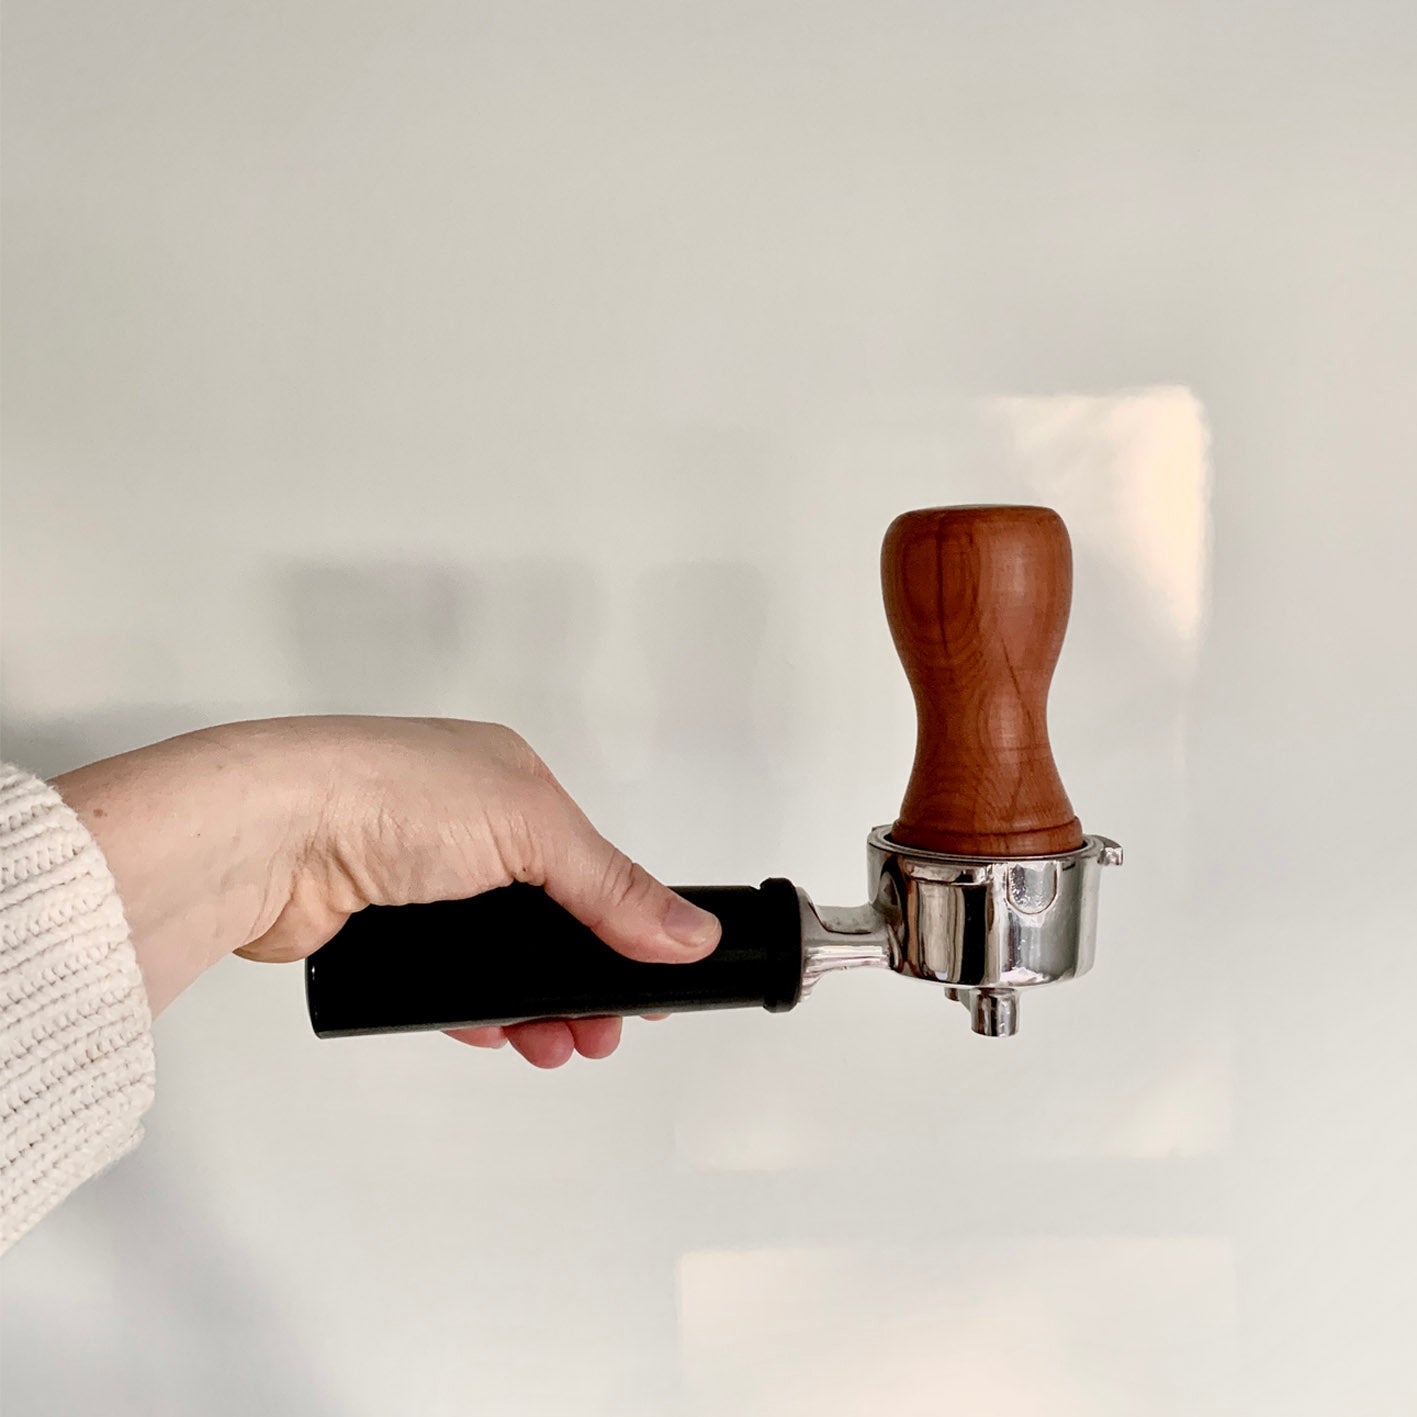 HANDCRAFTED COFFEE TAMPER